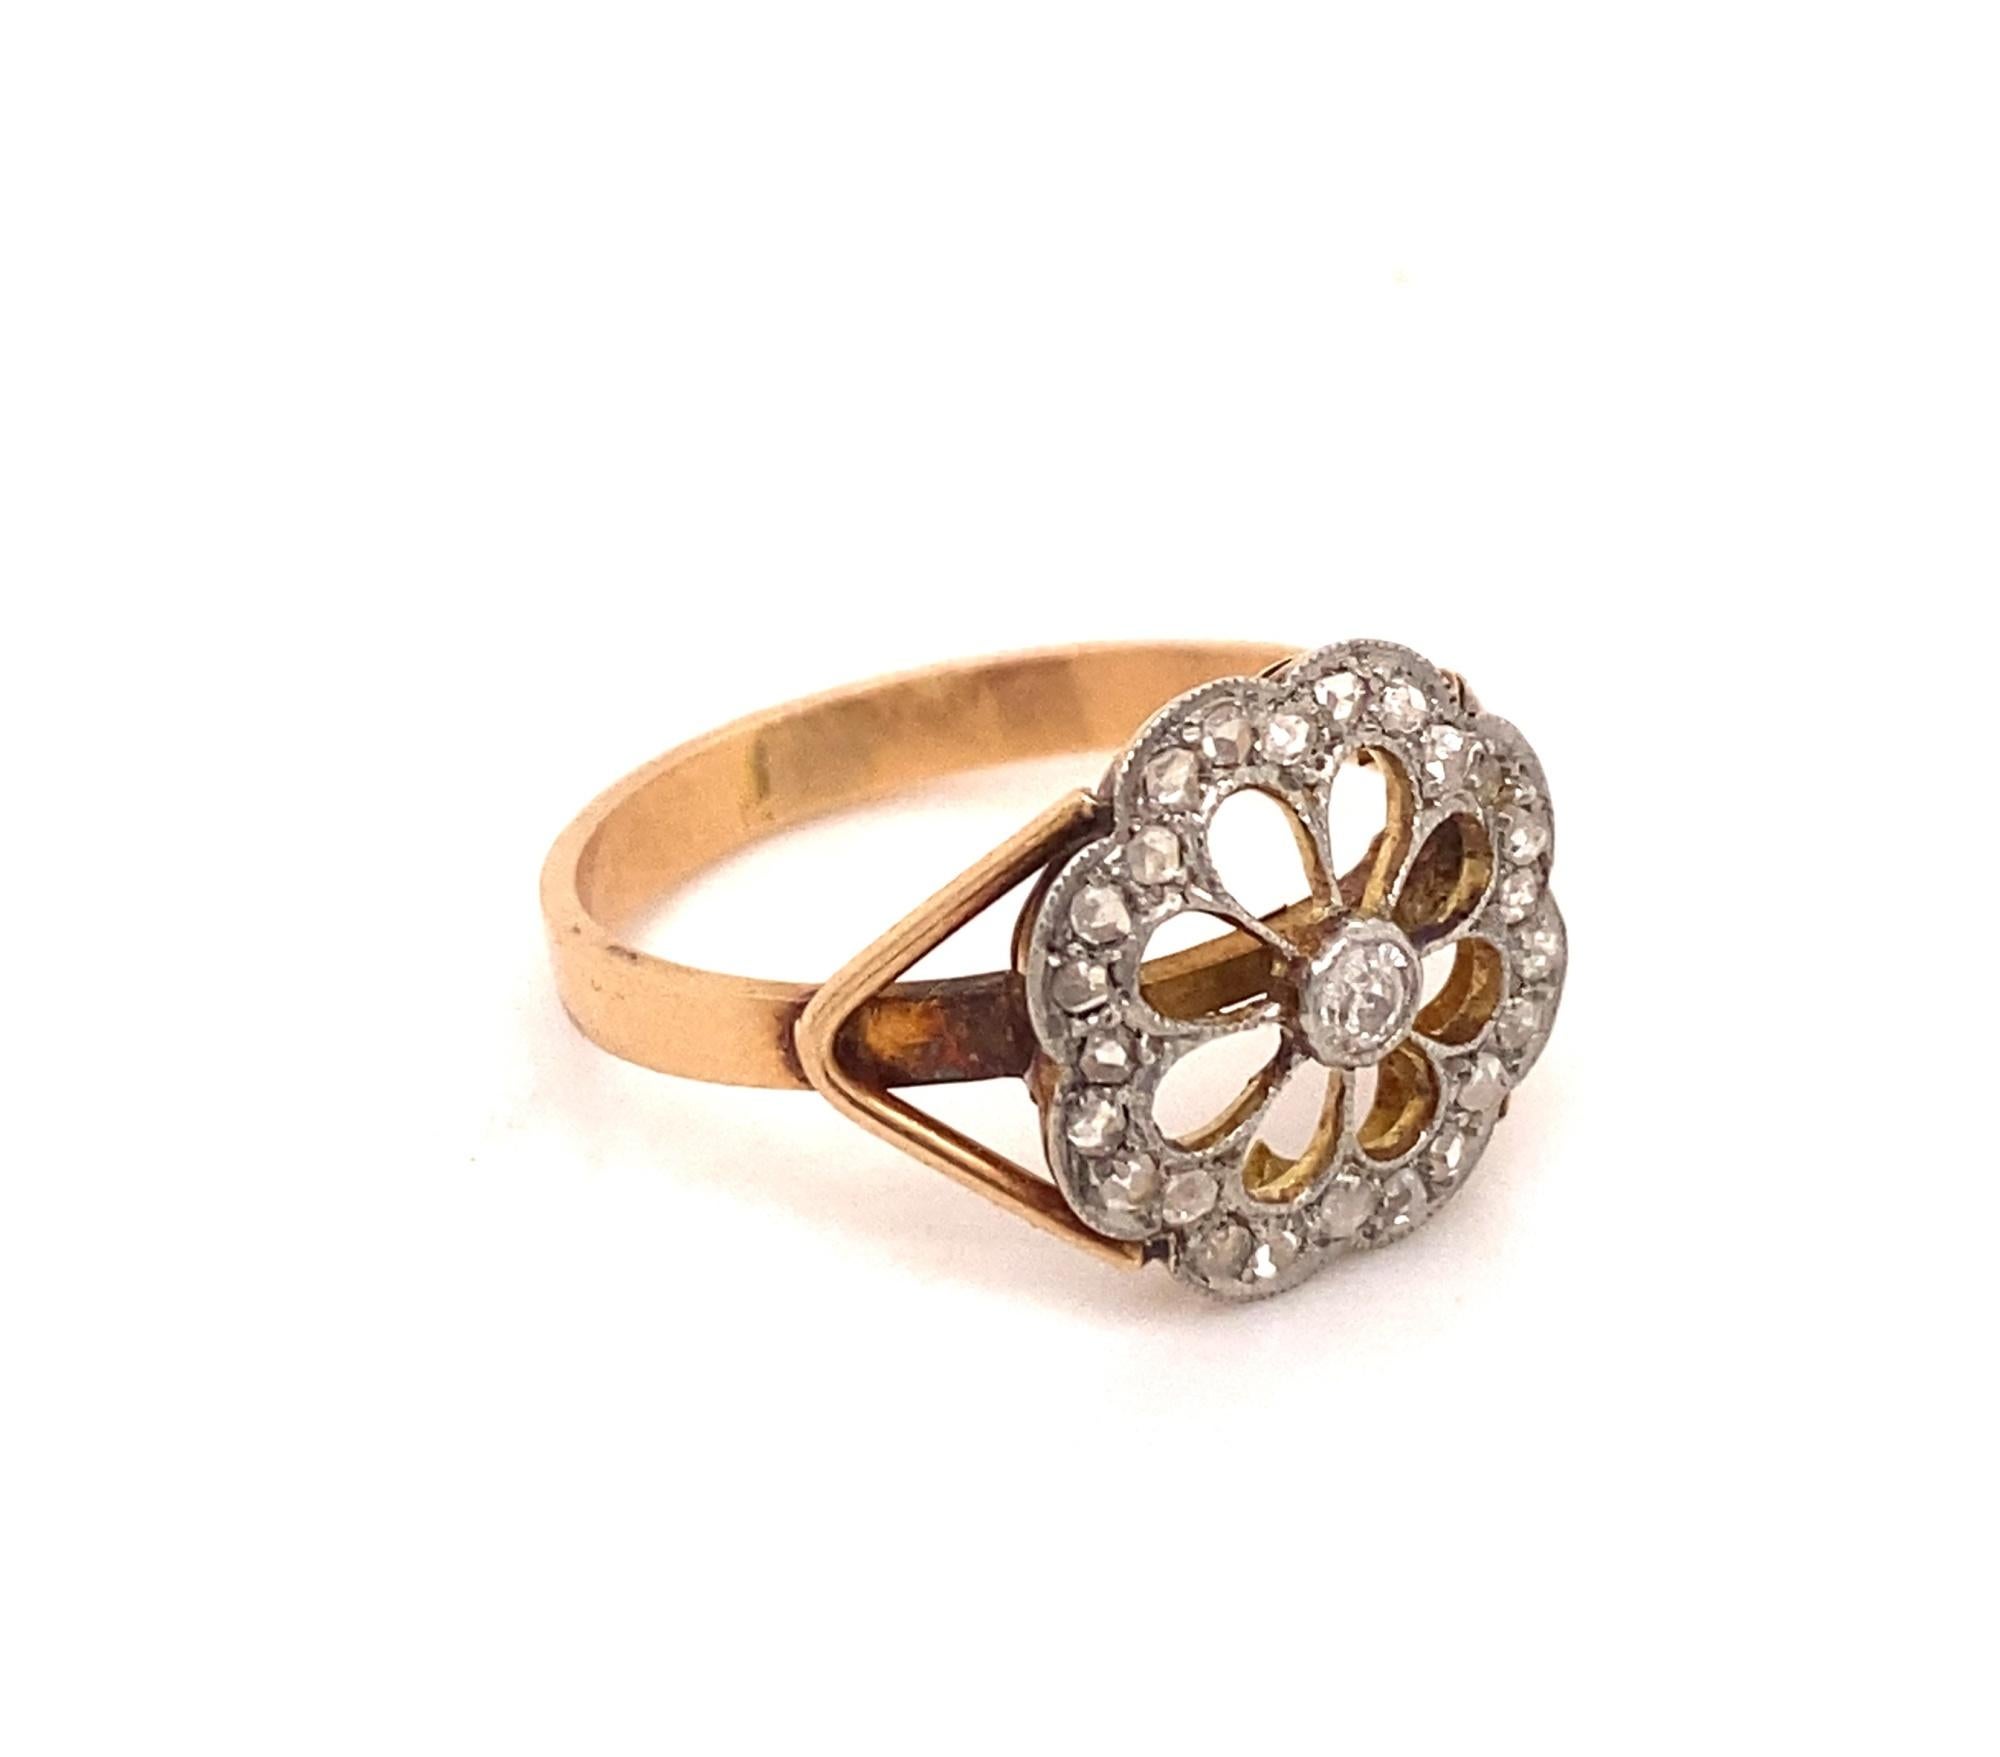 This is a beautiful original Edwardian ring c.1910. The ring has a flower like design with 1 old mine and 20 rose cut diamonds set in platinum with an 18K gold ring shank. The center diamond measures .07 carats total weight .50 carats I color SI-1